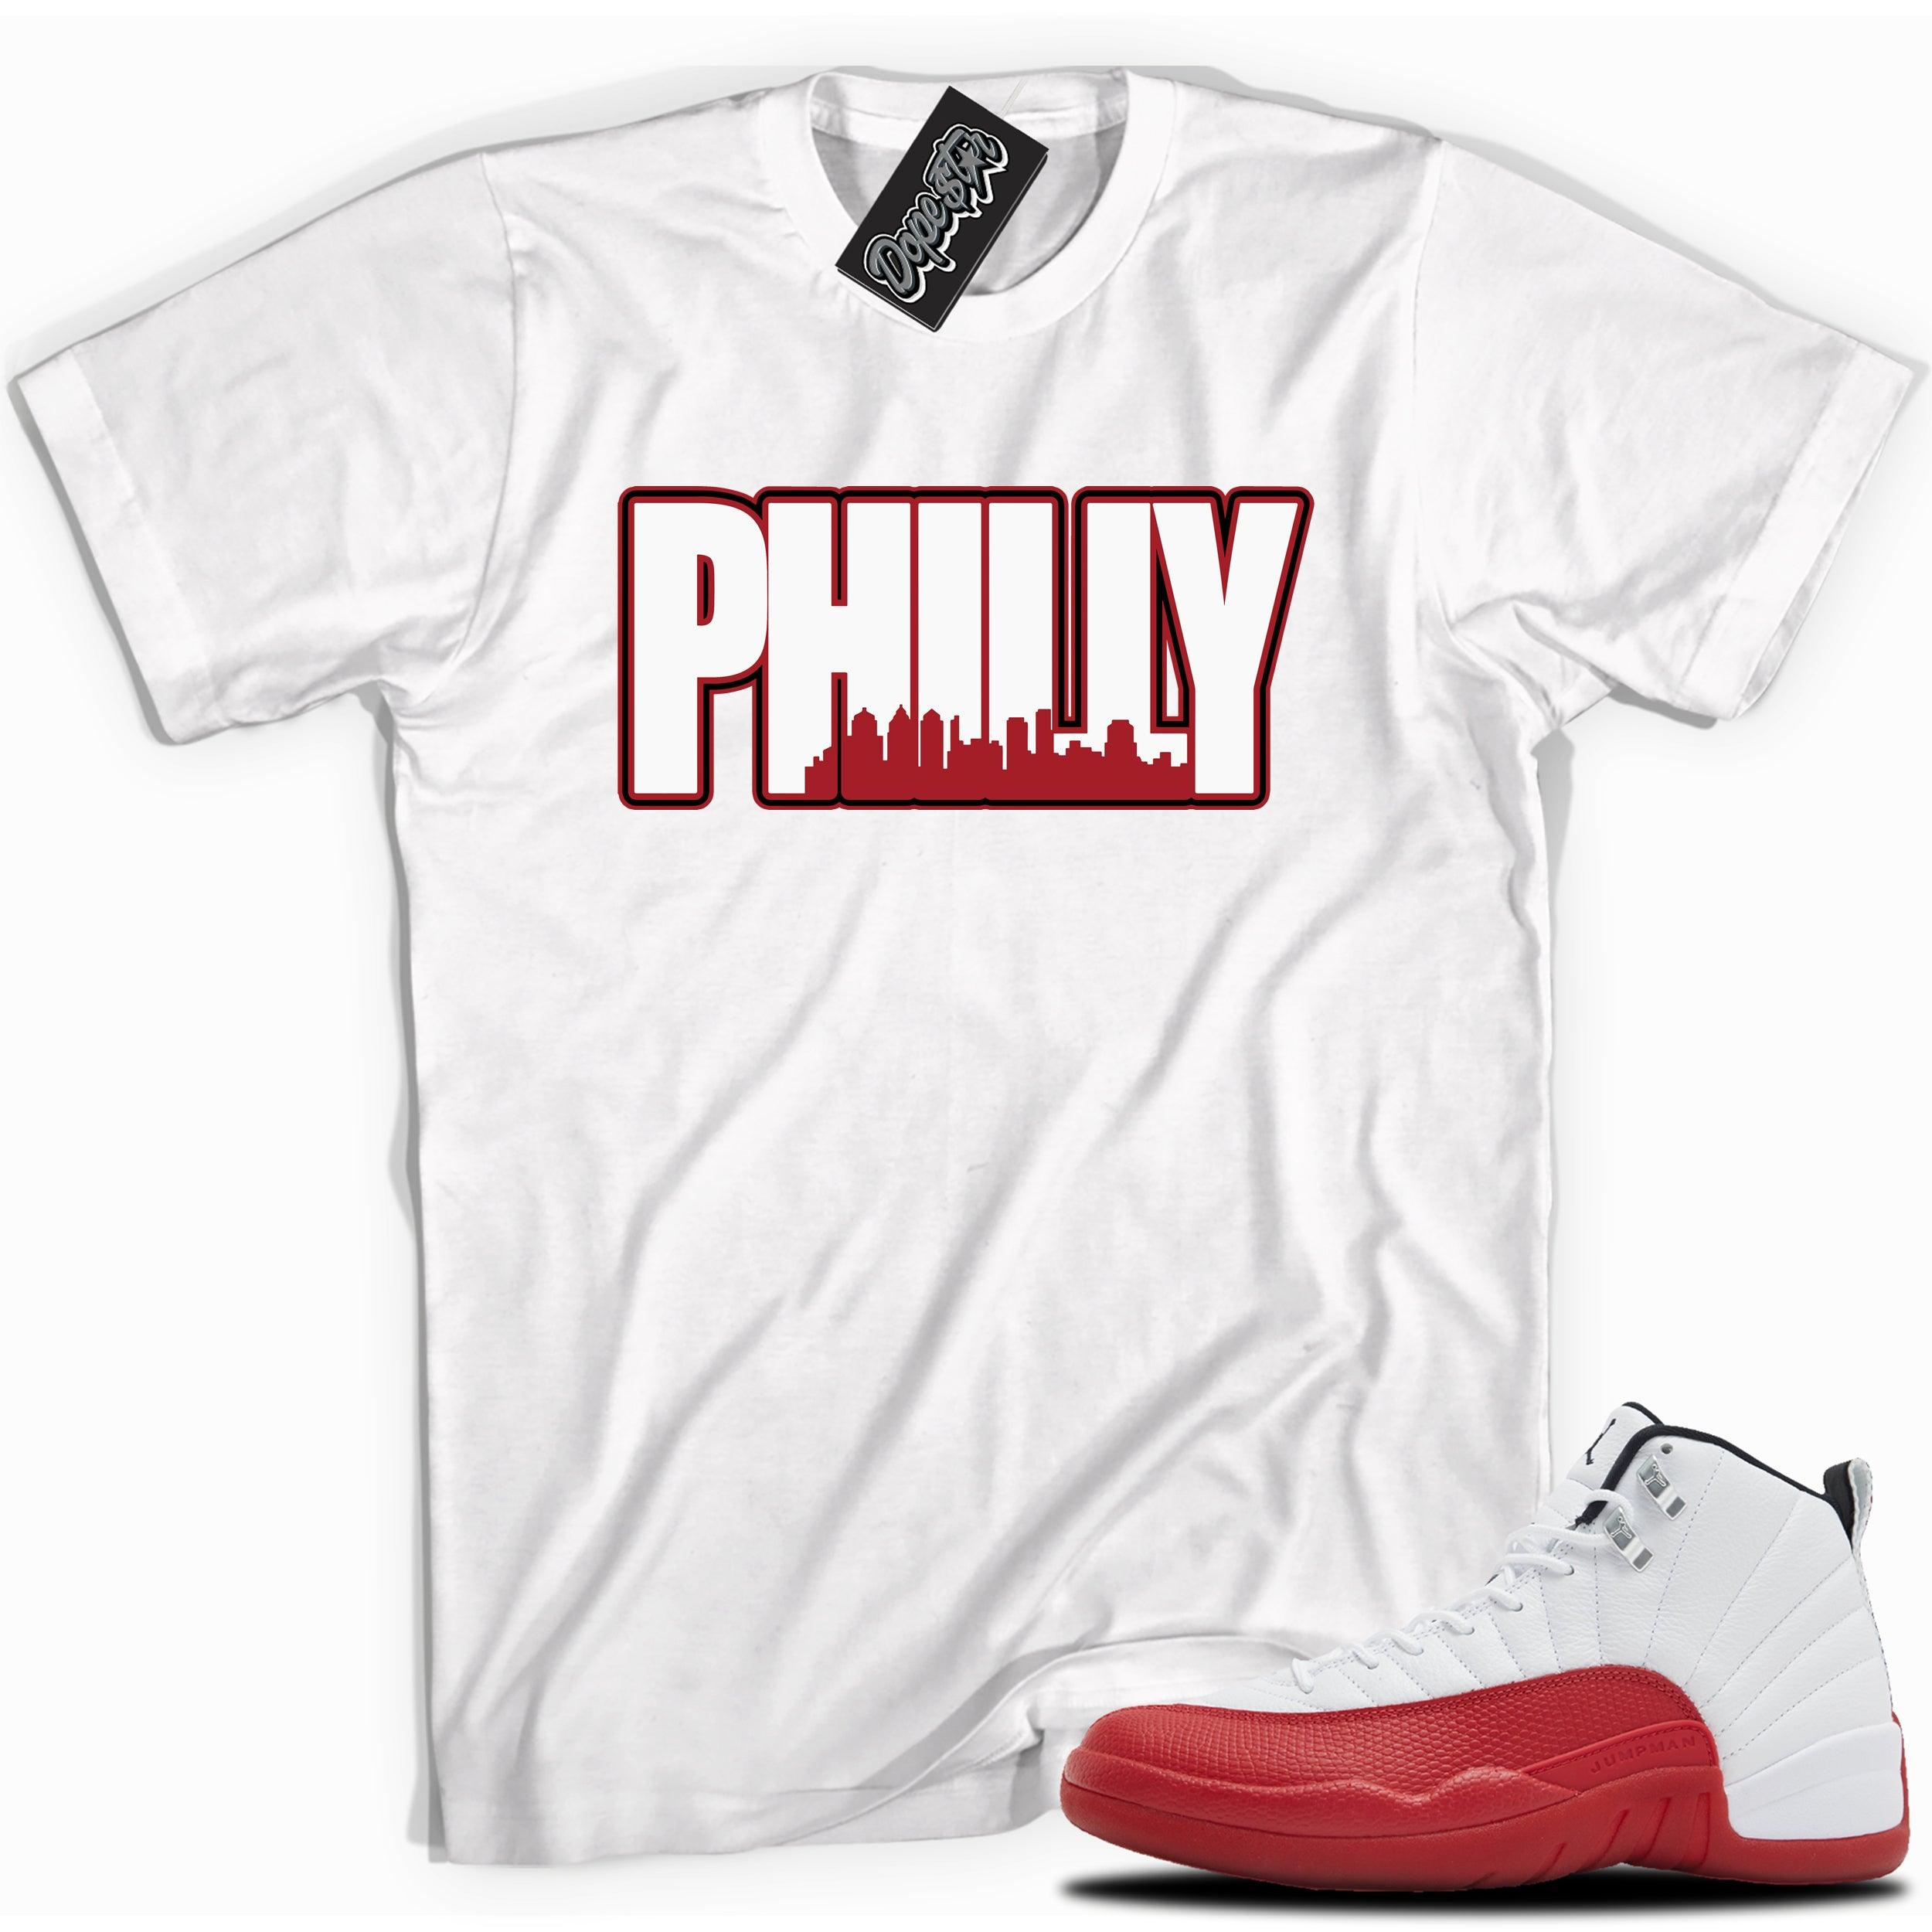 Cool White graphic tee with “PHILLY” print, that perfectly matches Air Jordan 12 Retro Cherry Red 2023 red and white sneakers